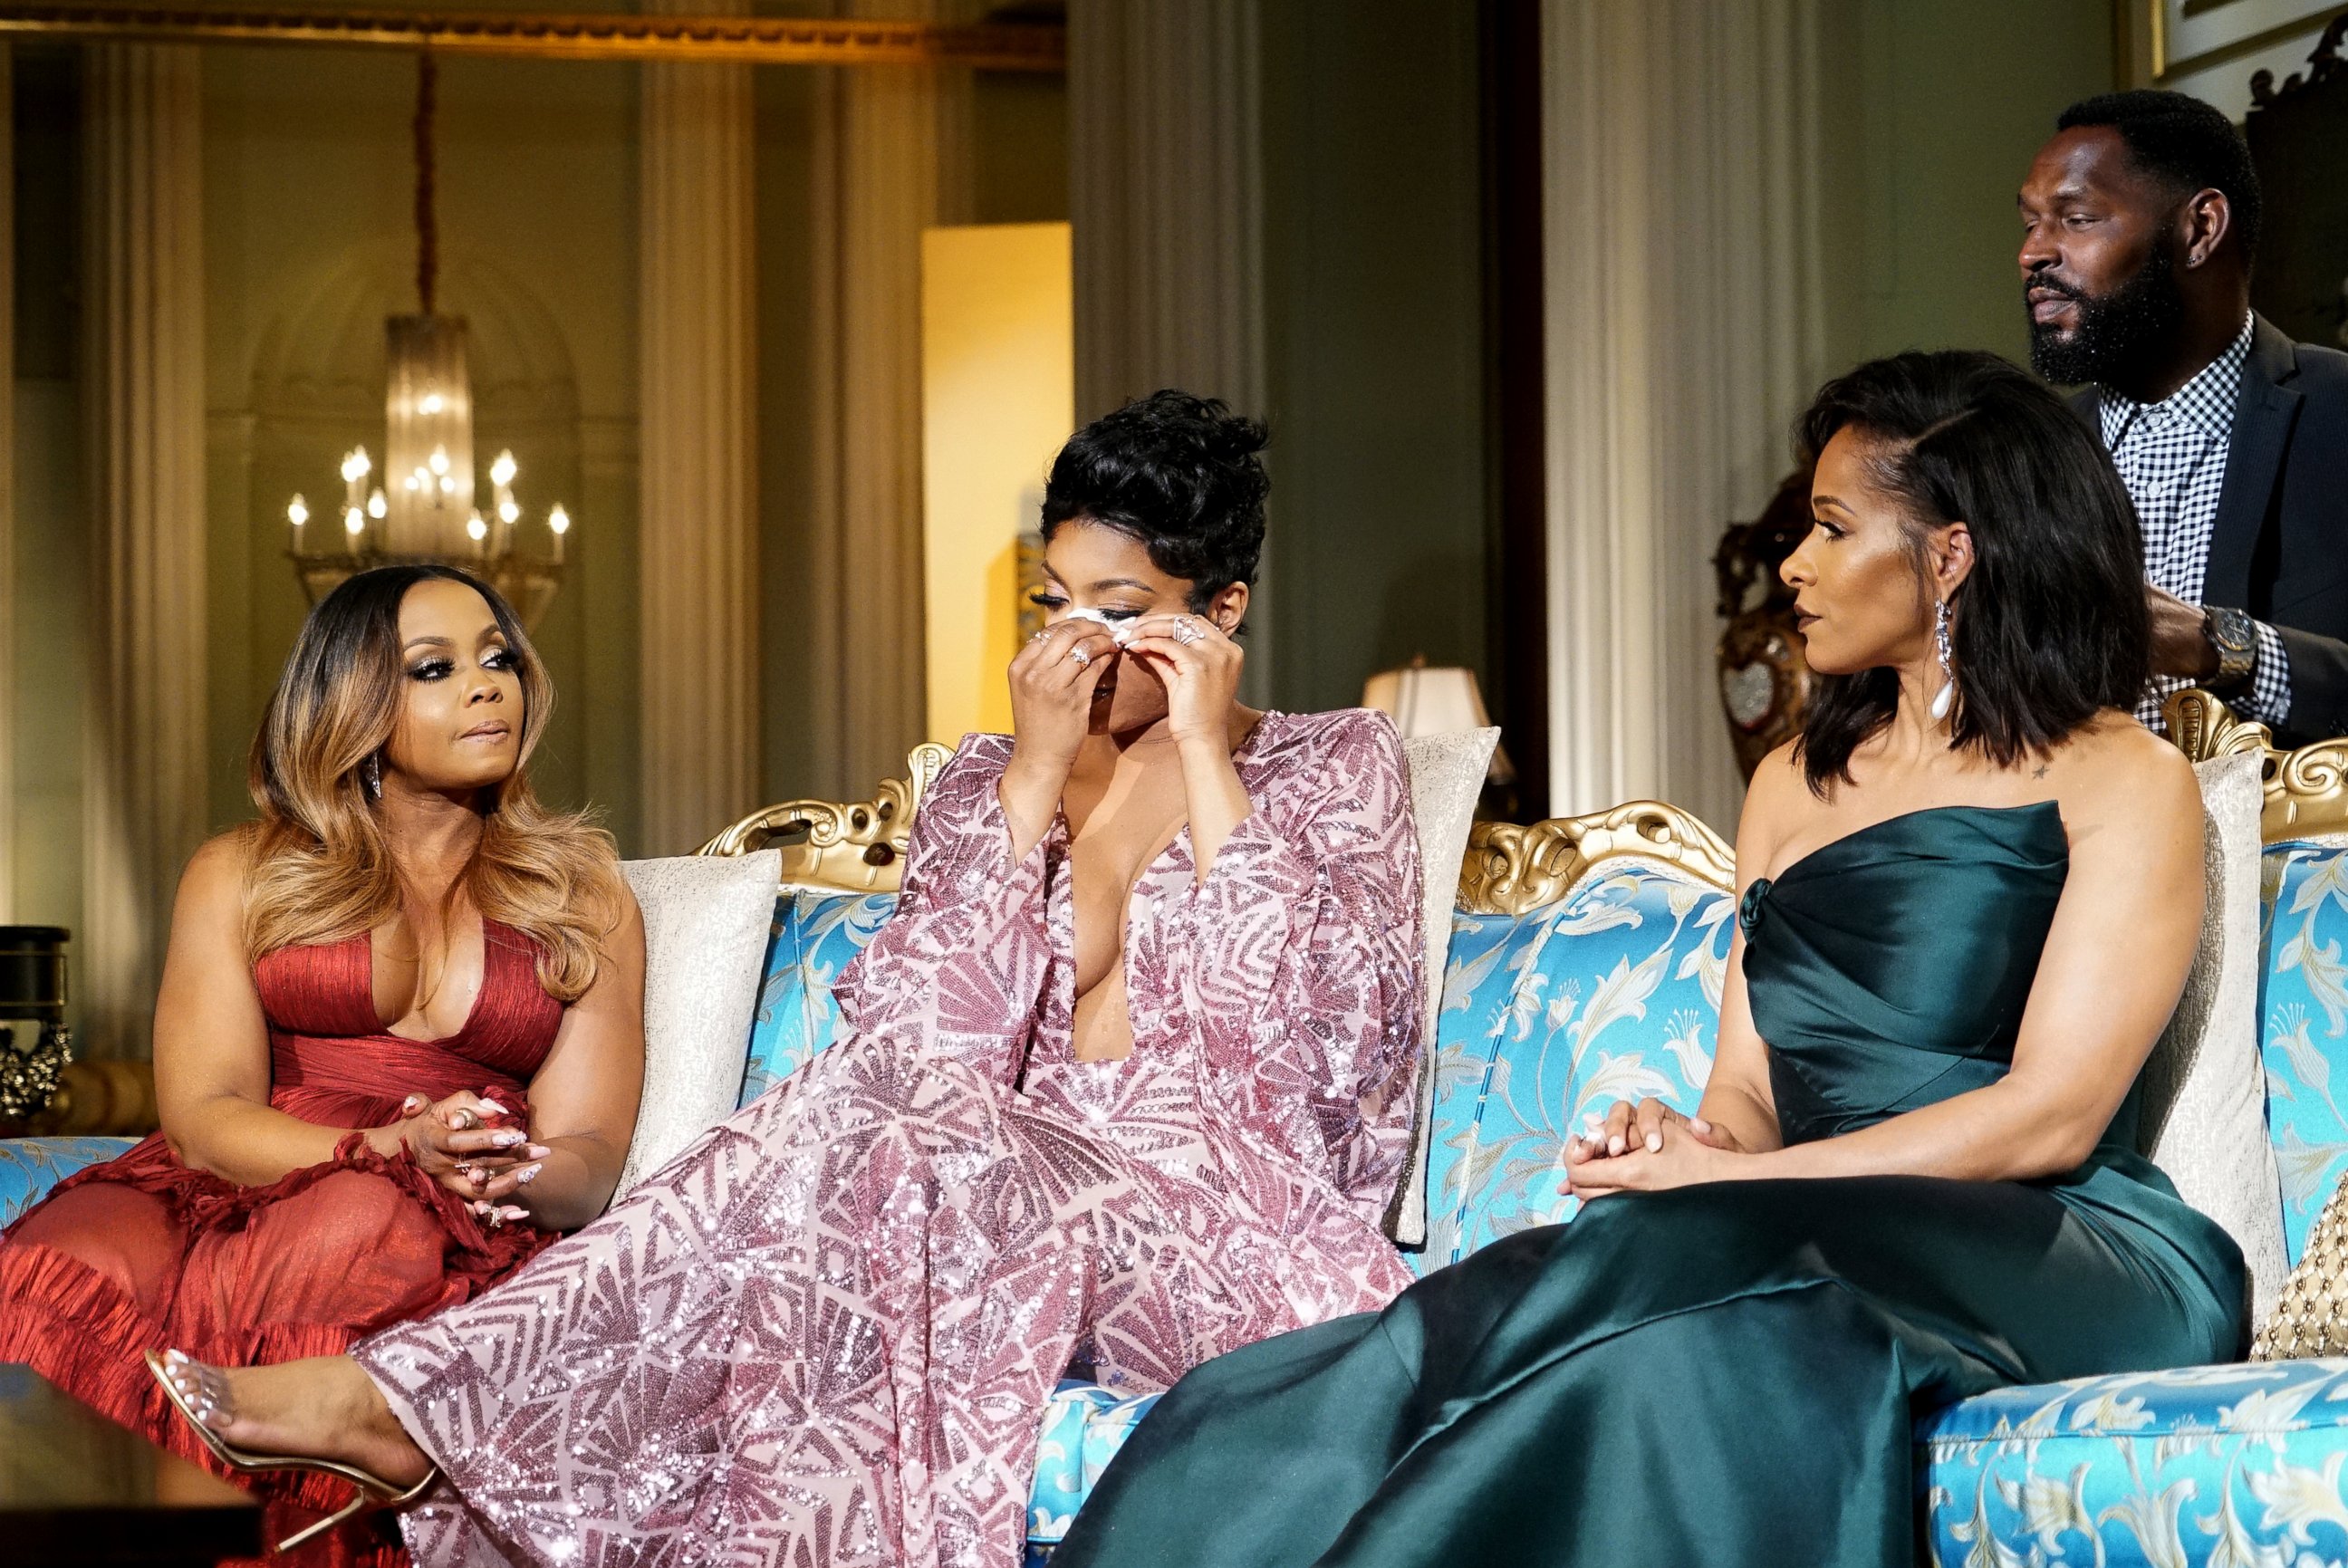 PHOTO: Phaedra Parks, left, Porsha Williams, center, and Sheree Whitfield on "The Real Housewives of Atlanta" reunion episode.